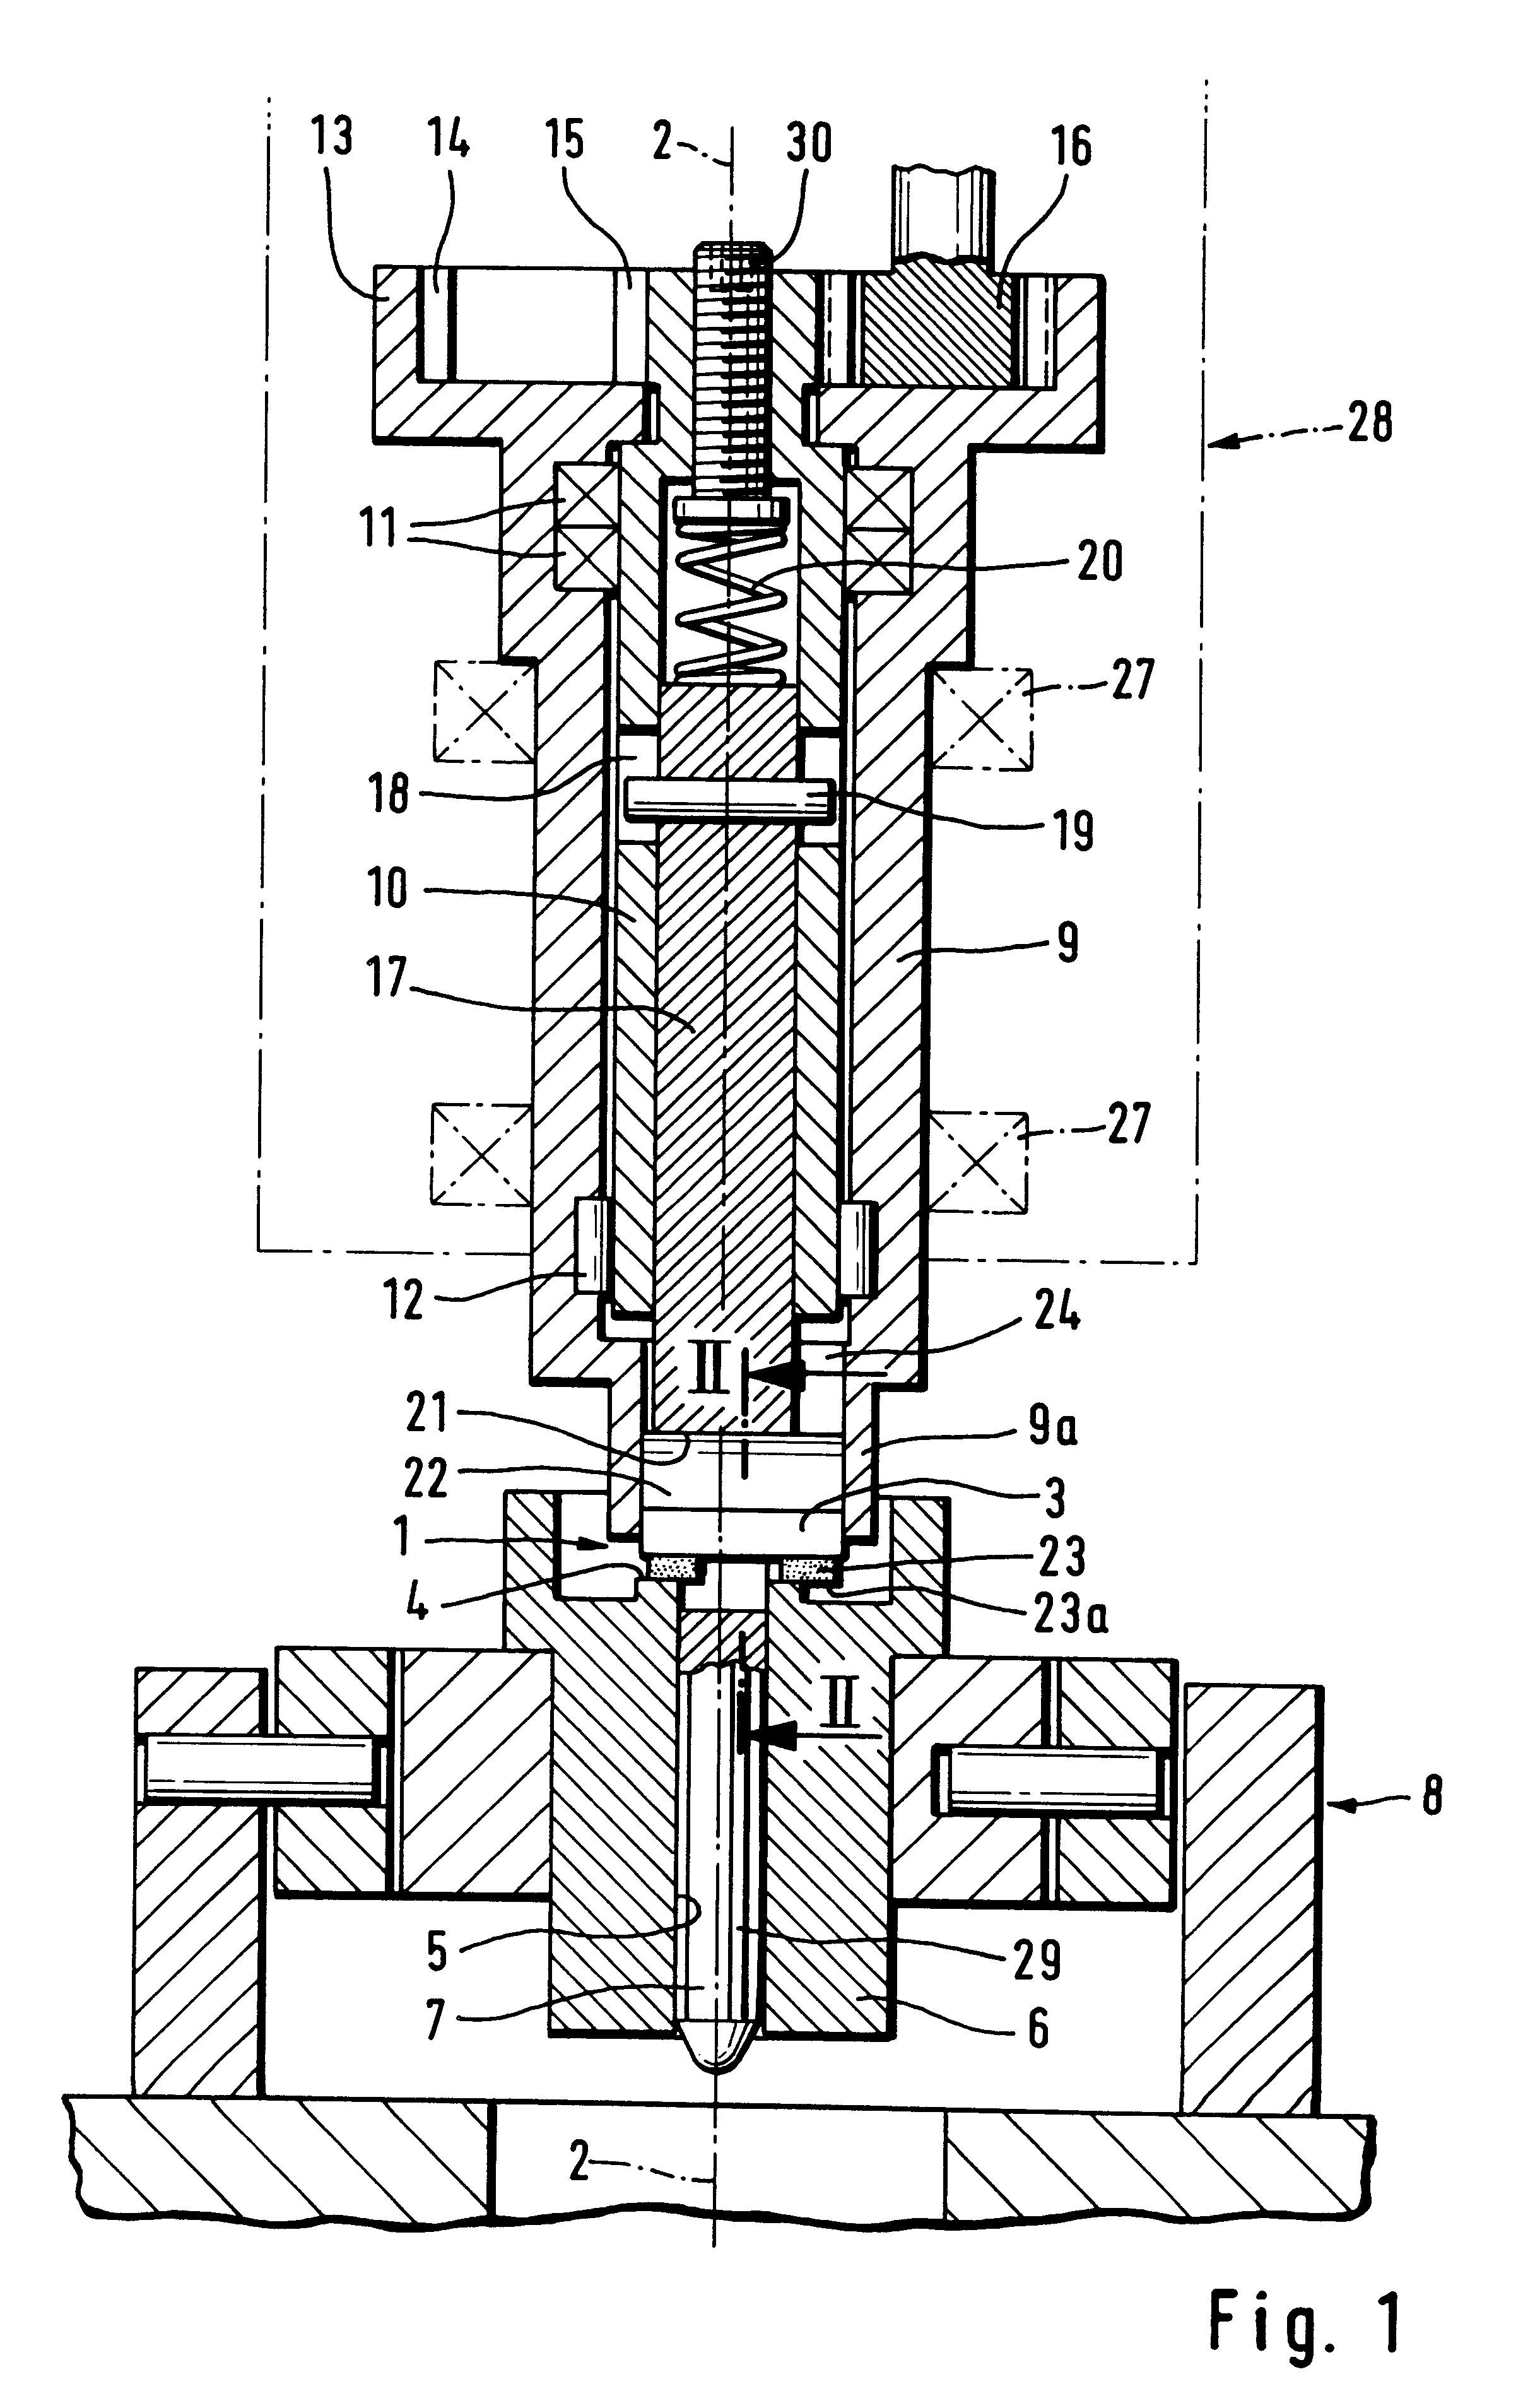 Device for grinding an end face, especially an annular surface at the edge of a workpiece bore